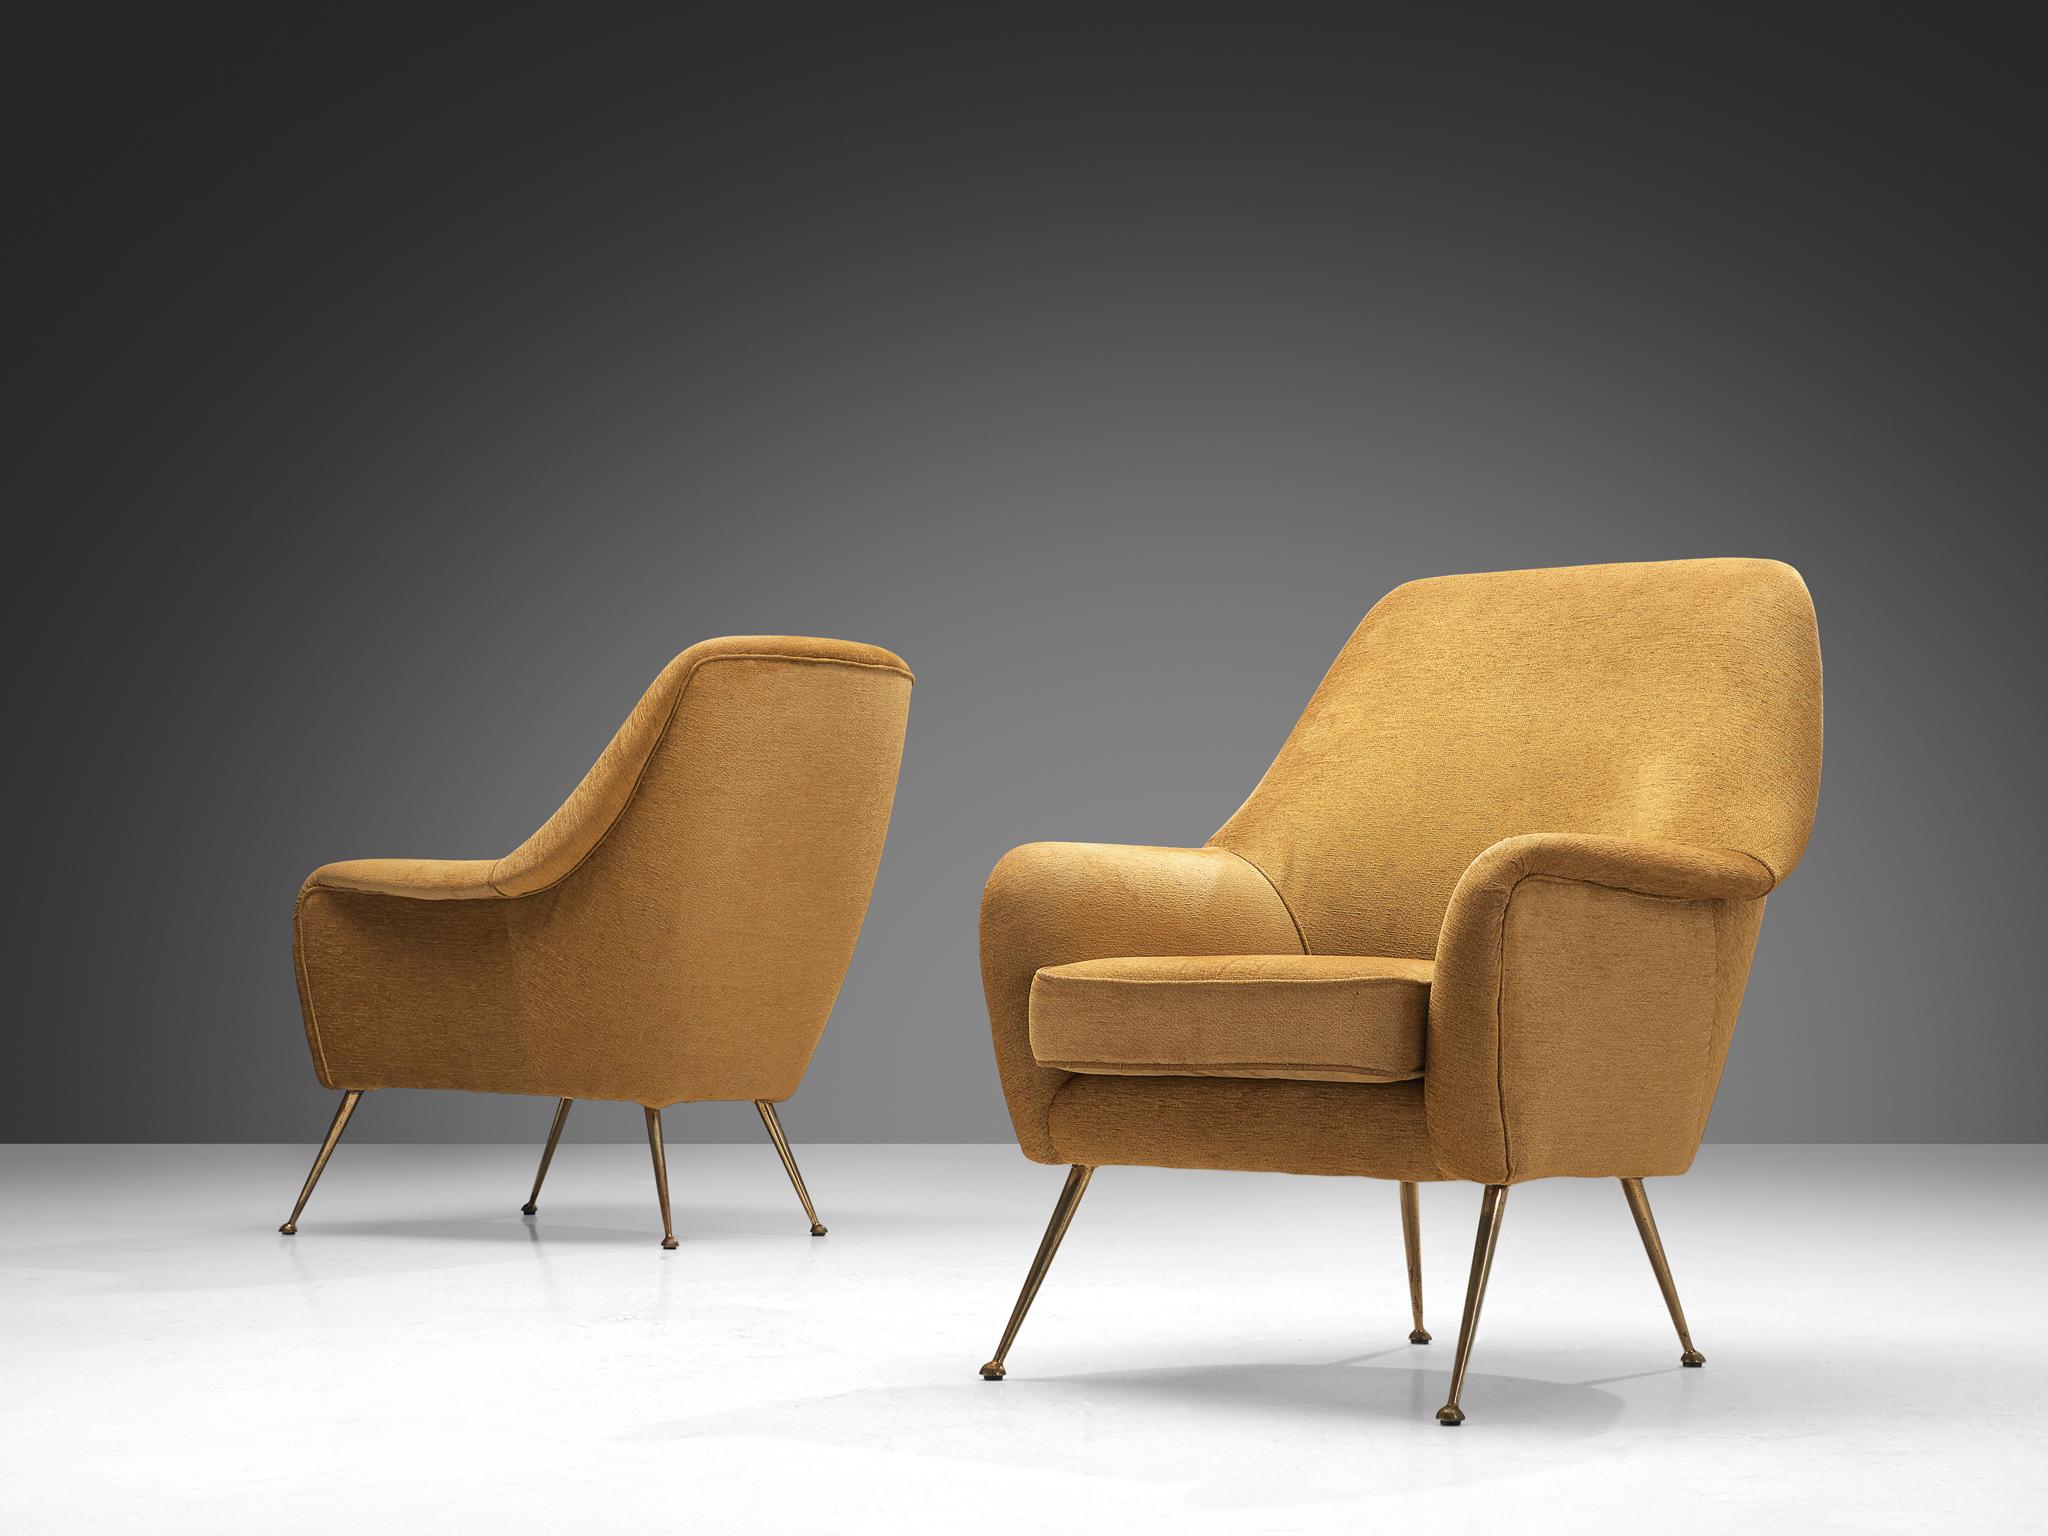 Pair of lounge chairs, yellow fabric, brass, metal, Italy, 1950s

Set of lounge chairs with yellow upholstery, designed and manufactured in Italy in the 1950s. This elegant chair has a wide aesthetic and with a high, gracious formed backrest. The